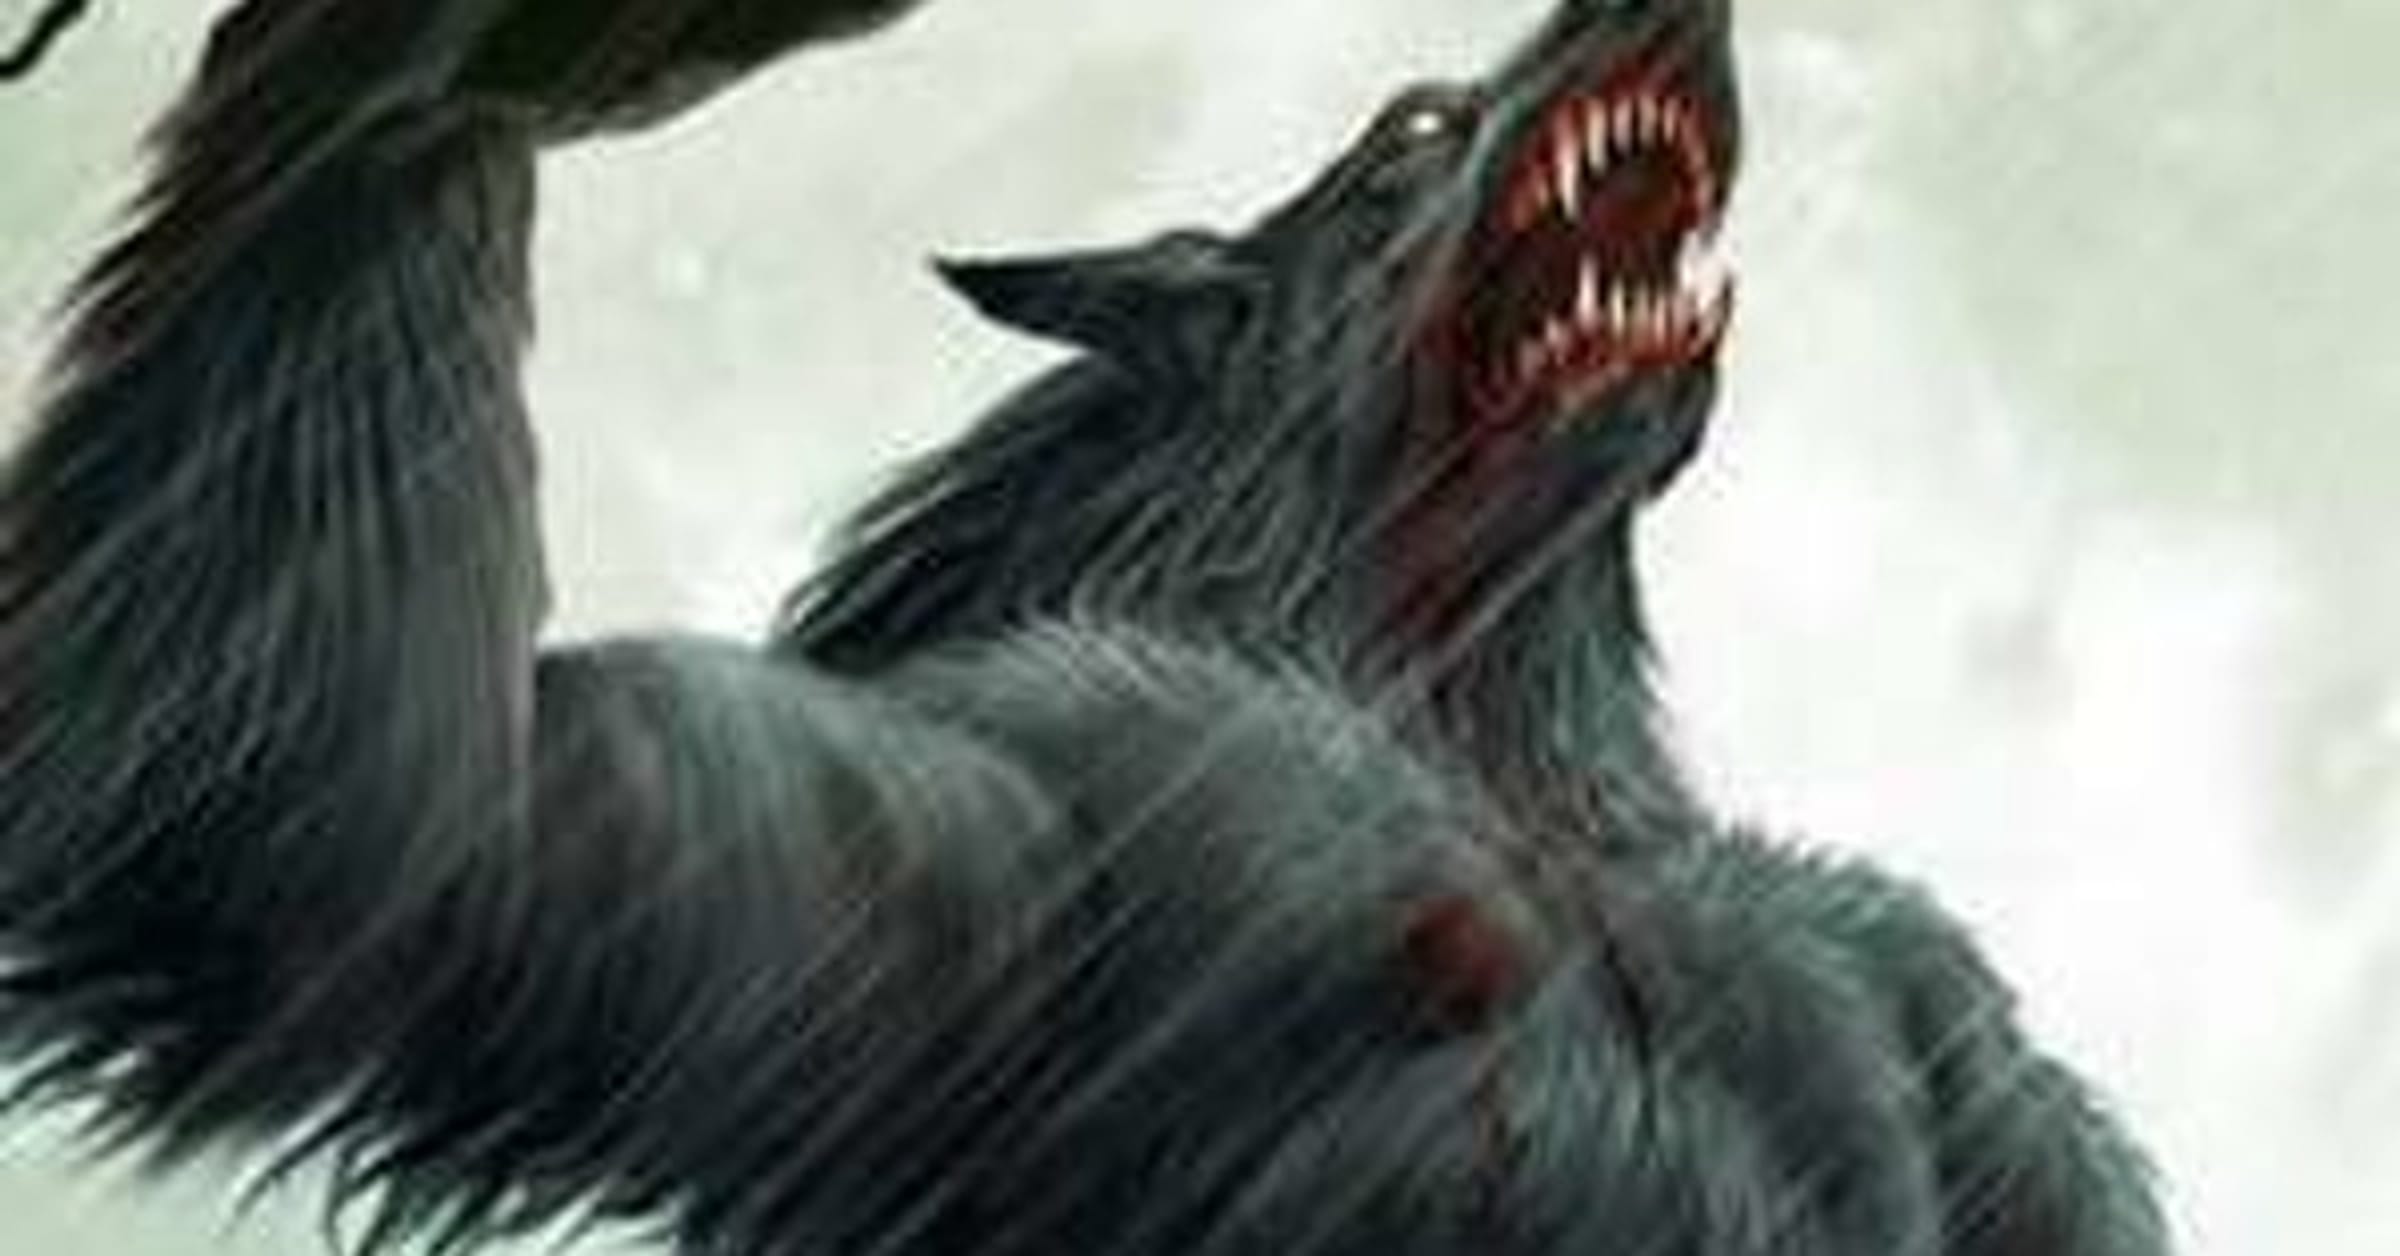 The 10 best songs about werewolves